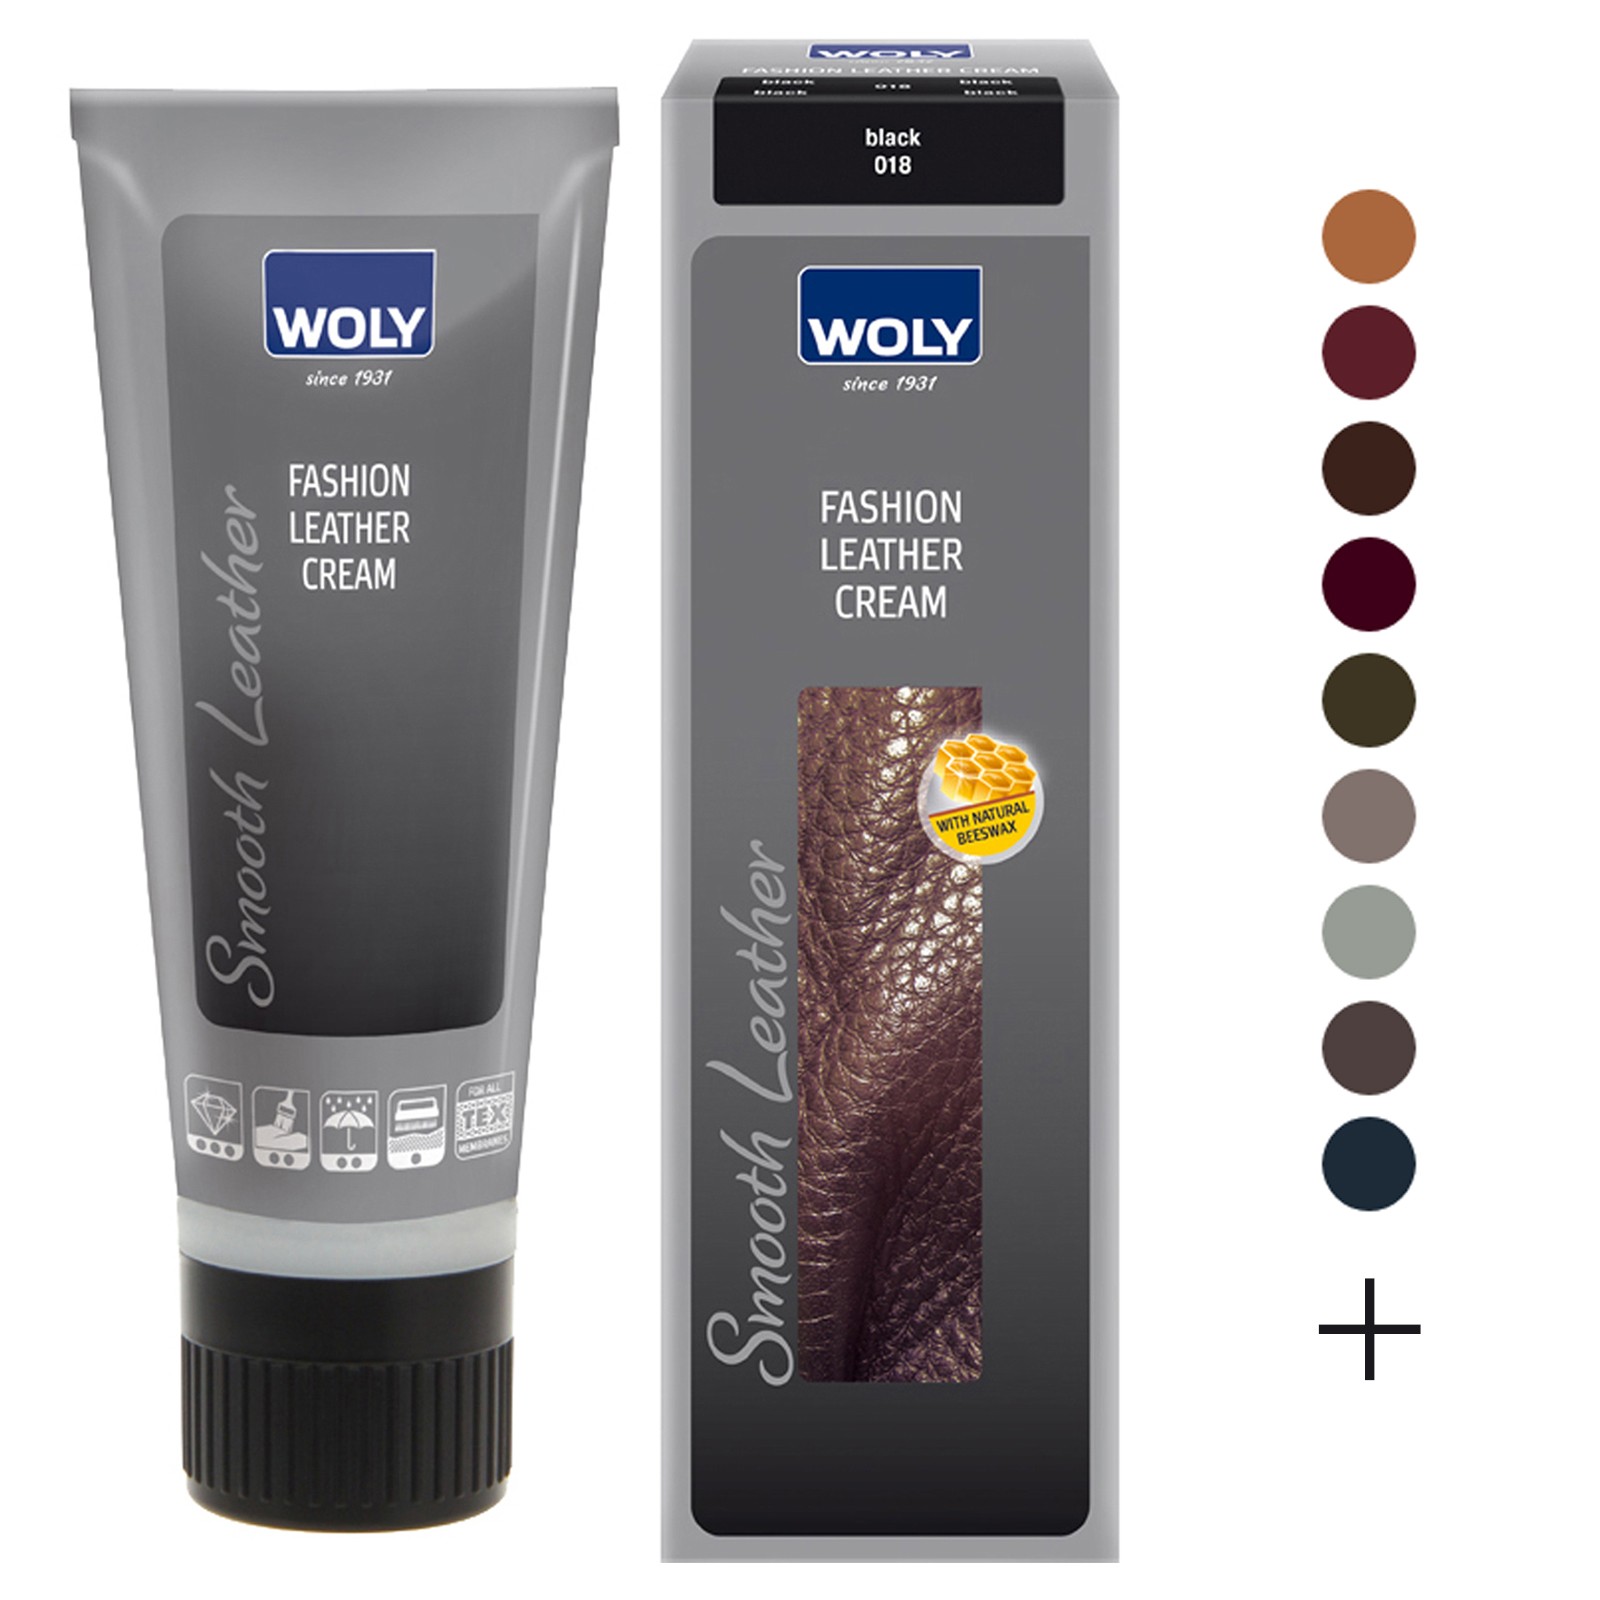 woly shoe care website